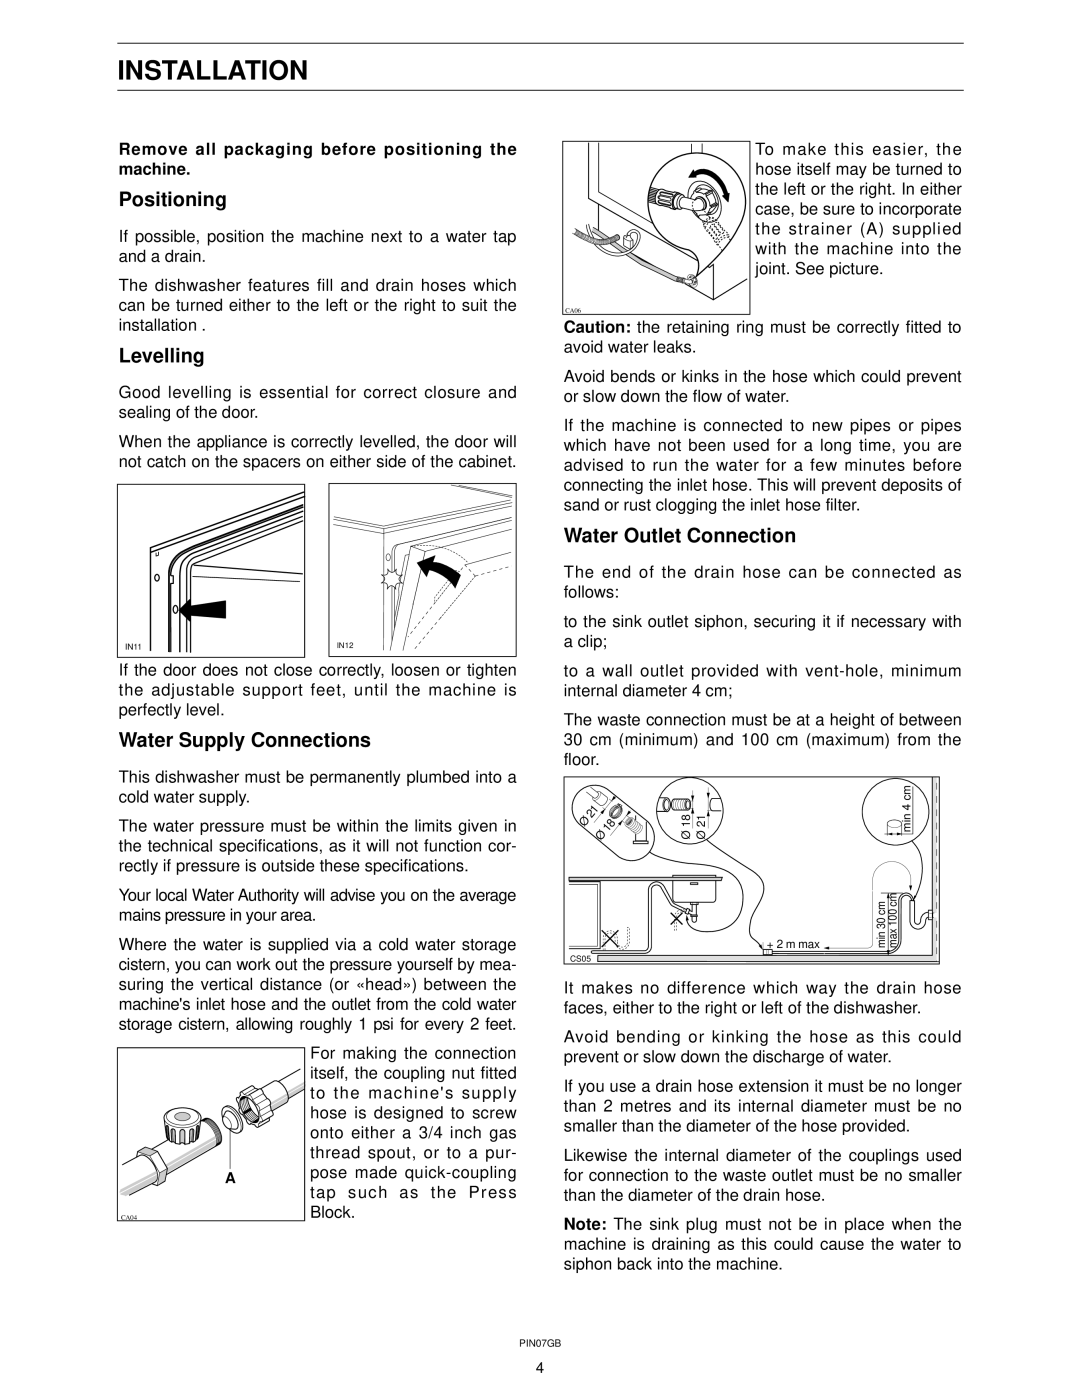 Zanussi ZT 415 manual Installation, Positioning, Levelling, Water Outlet Connection, Water Supply Connections 